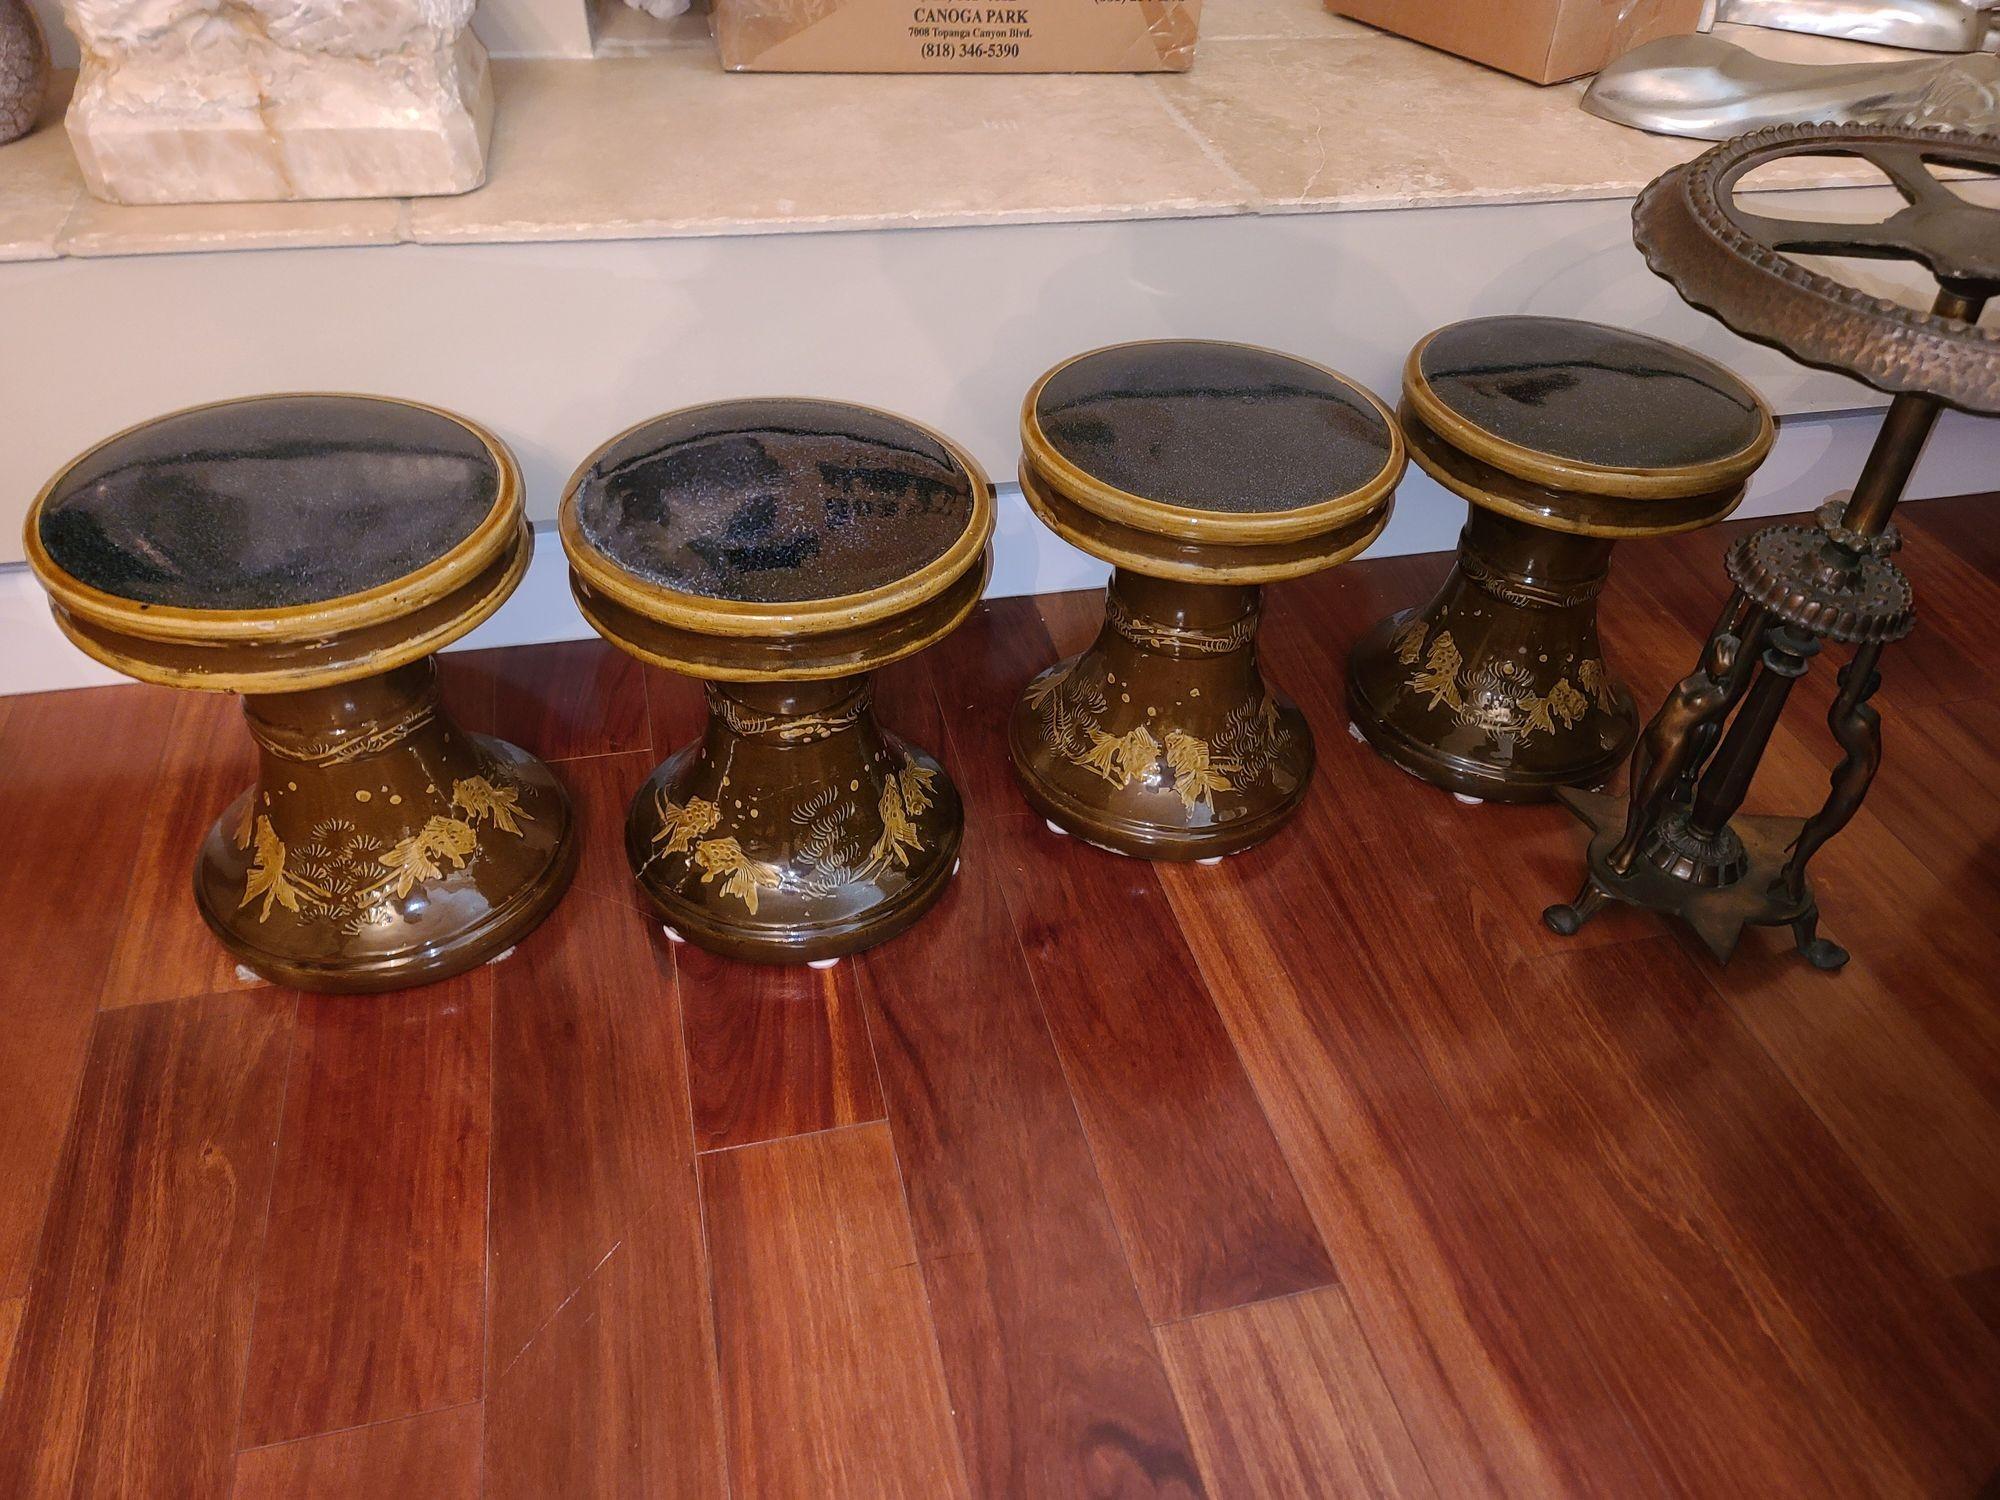 Original set of four 1970s California Pottery hourglass garden pedestals and plant stands in a brown glaze with beige highlights featuring a relief of fish along the base of each stool. This ensemble not only serves as functional furniture but also